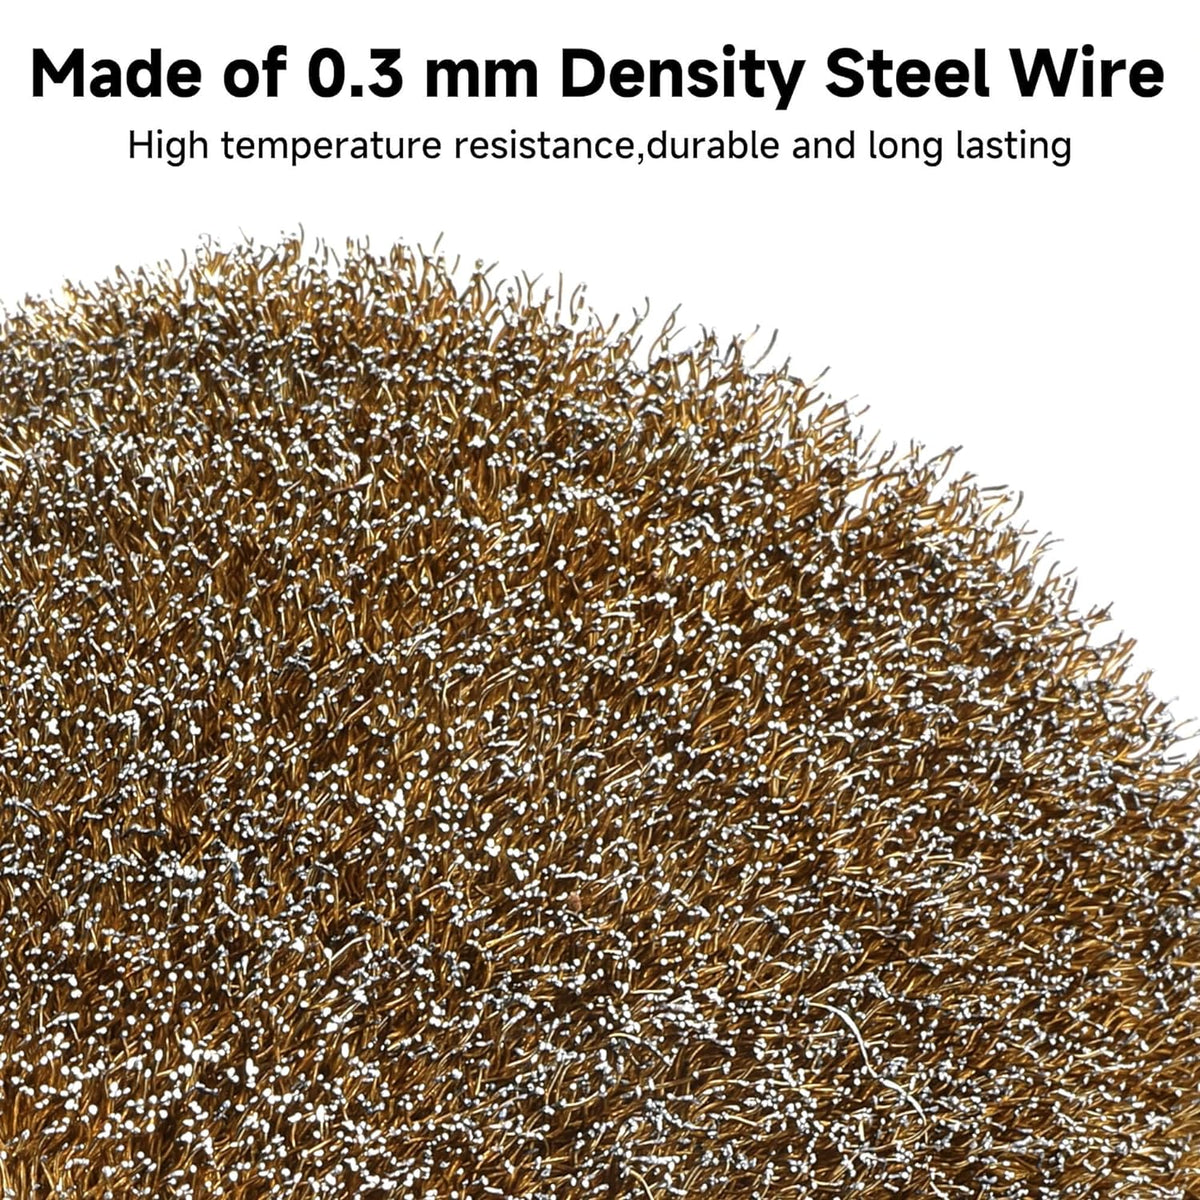 4.7" x 4" with 3/4" Quad Keyway Copper-Coated Polishing Wire Drum Heavy Rust Remover, 0.3mm Steel Wire